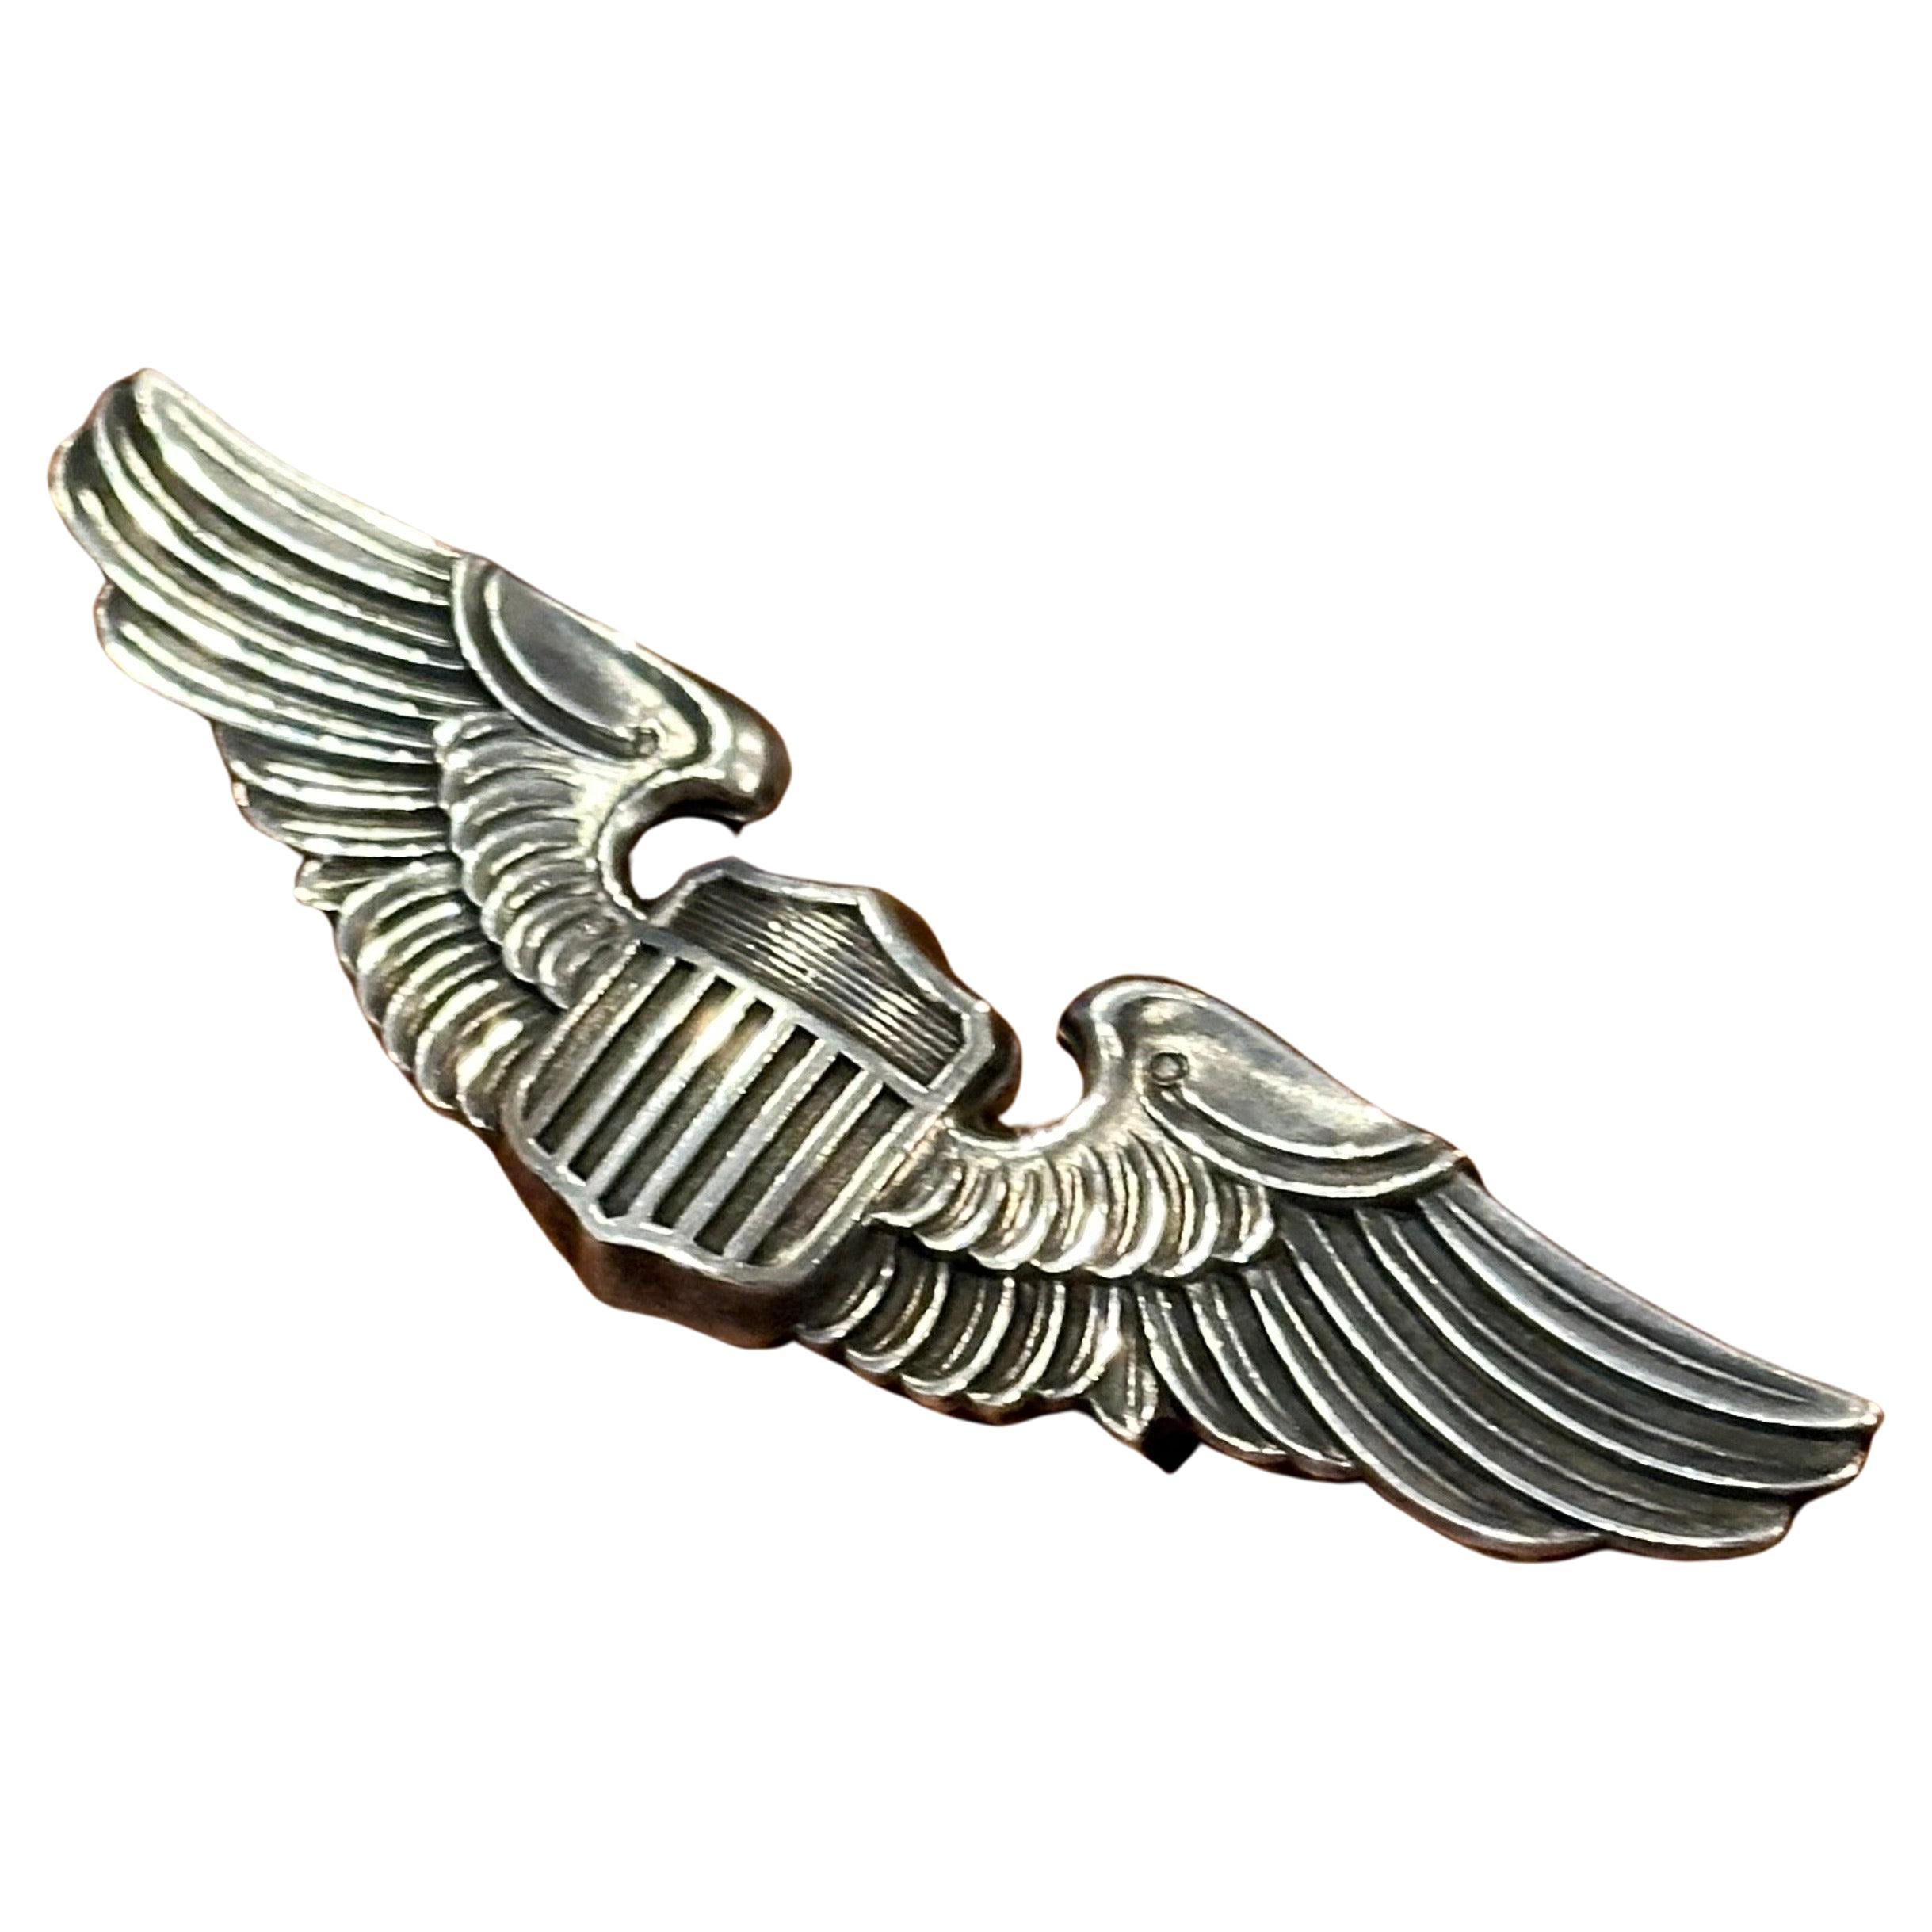 A very nice mid-century U.S. Air Force sterling silver pilot air wings shirt pin, circa 1940s. The piece is in very good vintage condition with a nice patina and measures 3